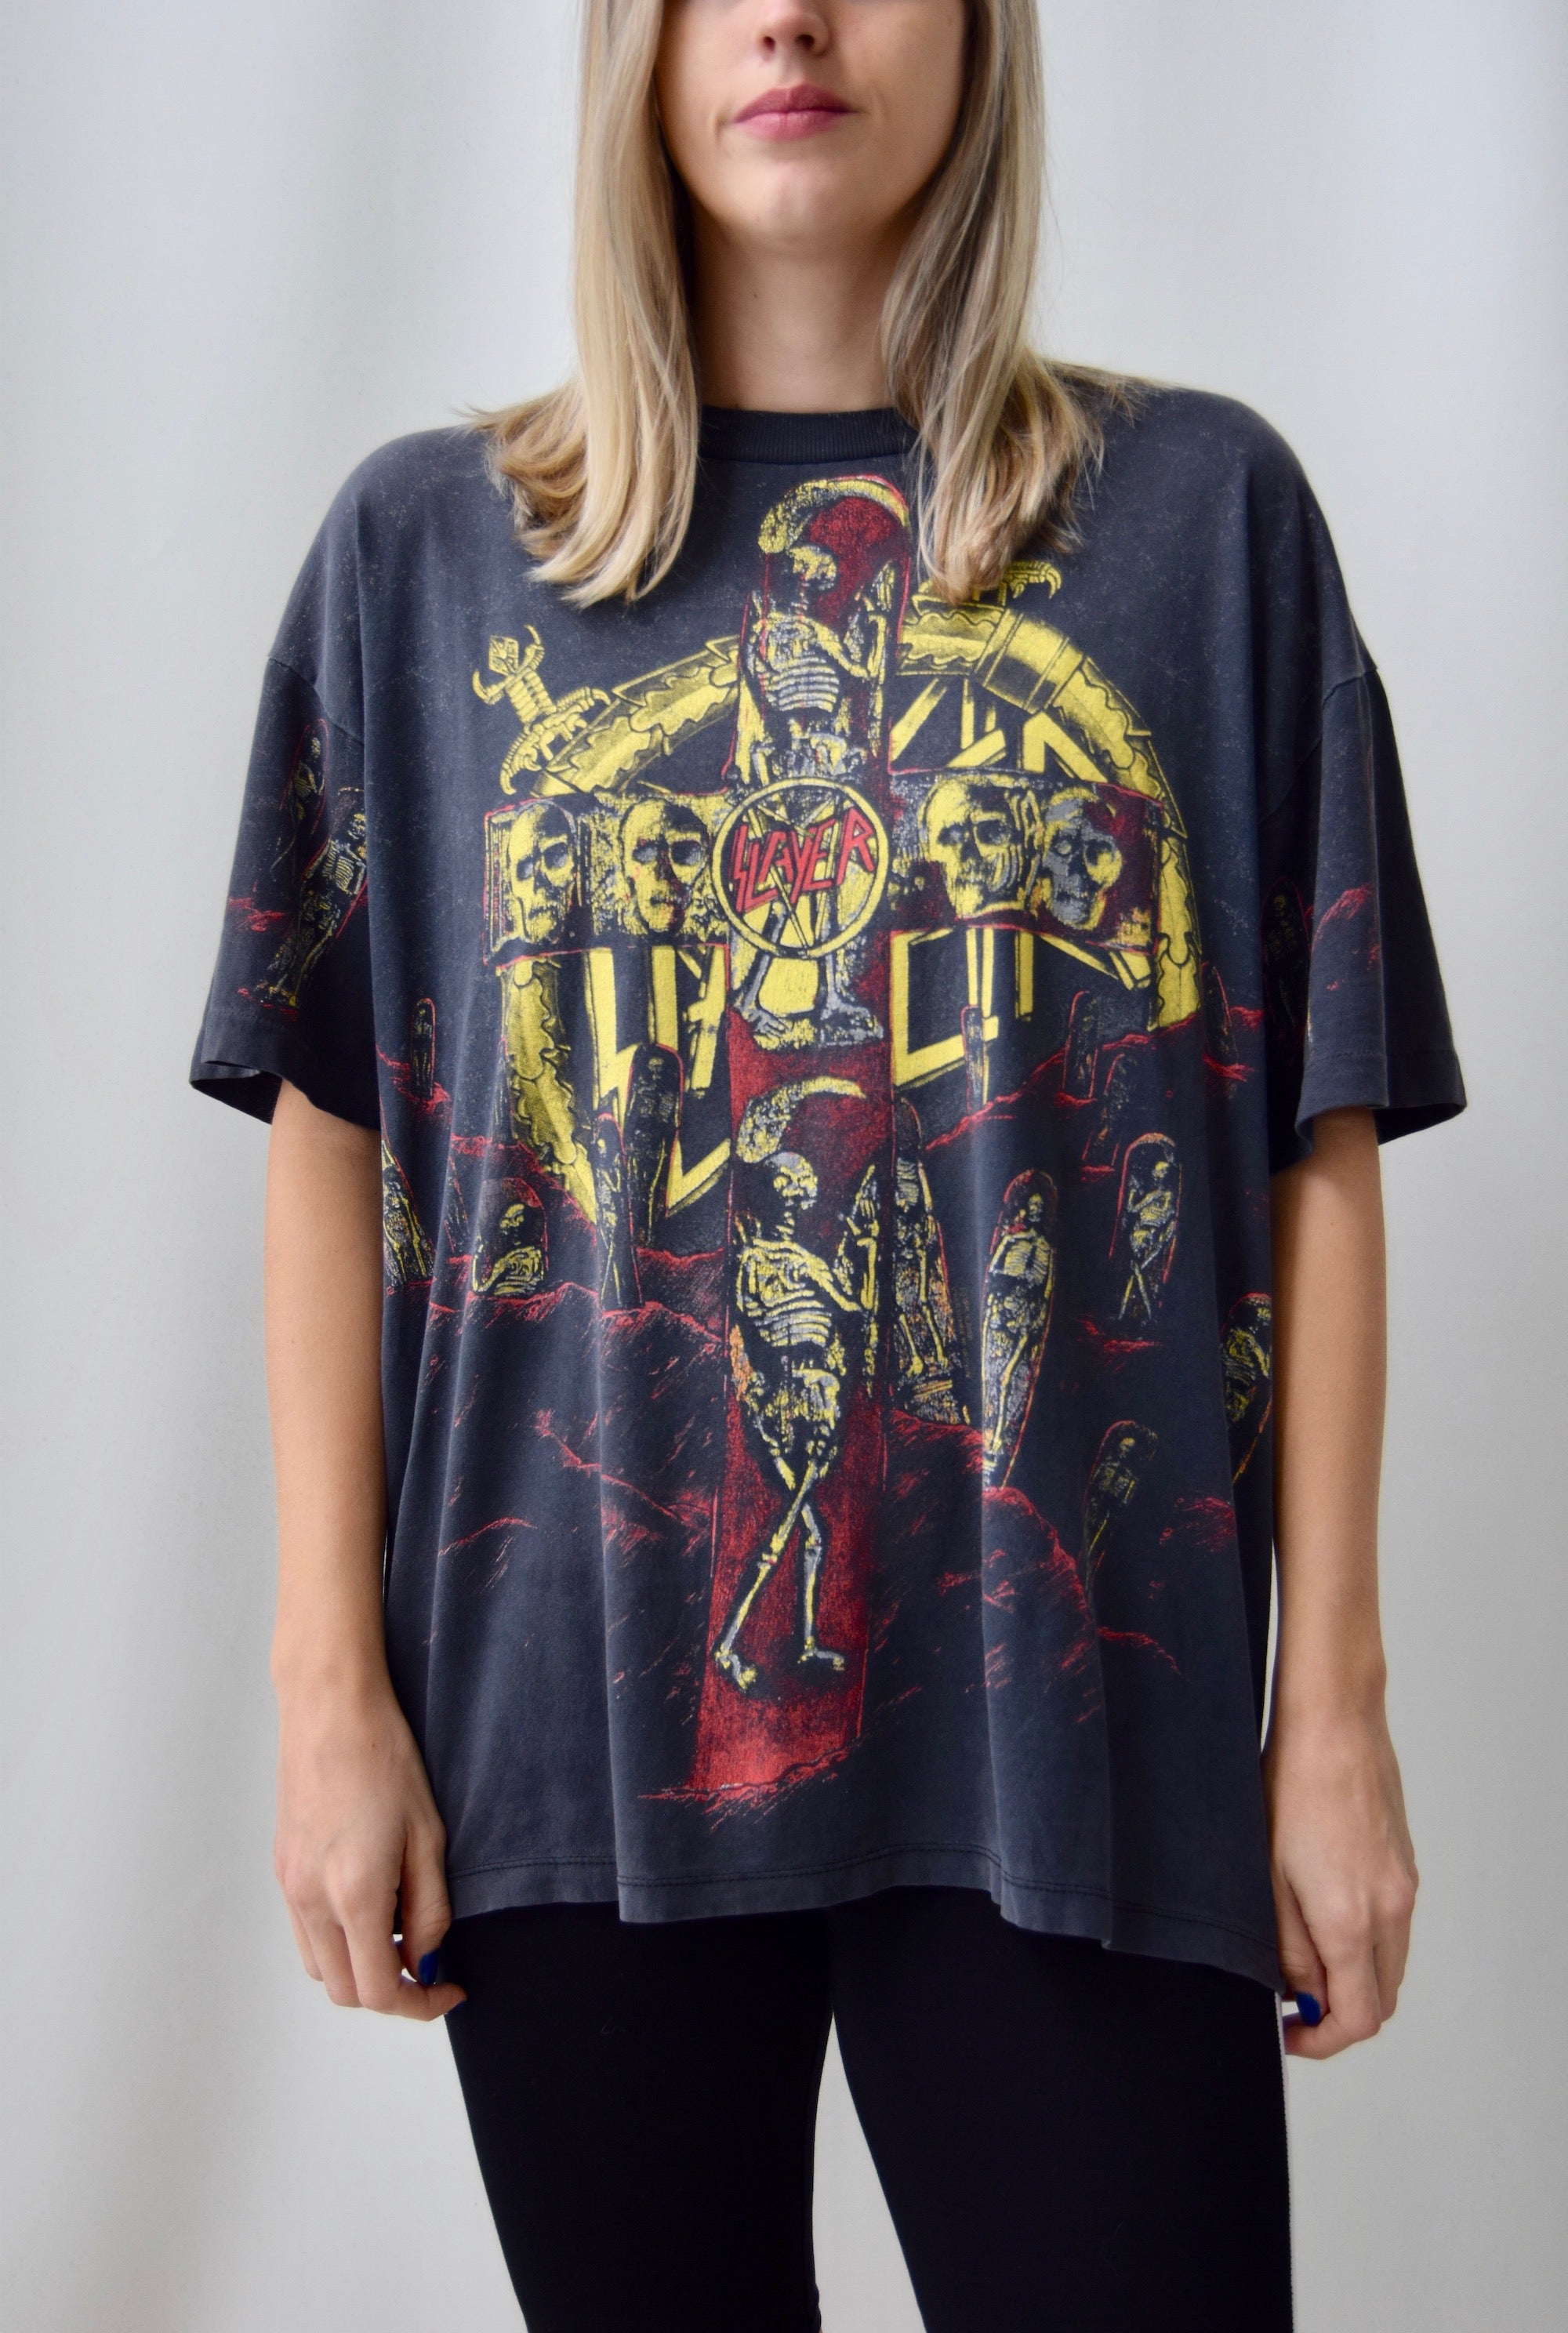 1991 Slayer Seasons In The Abyss All Over Print T-Shirt